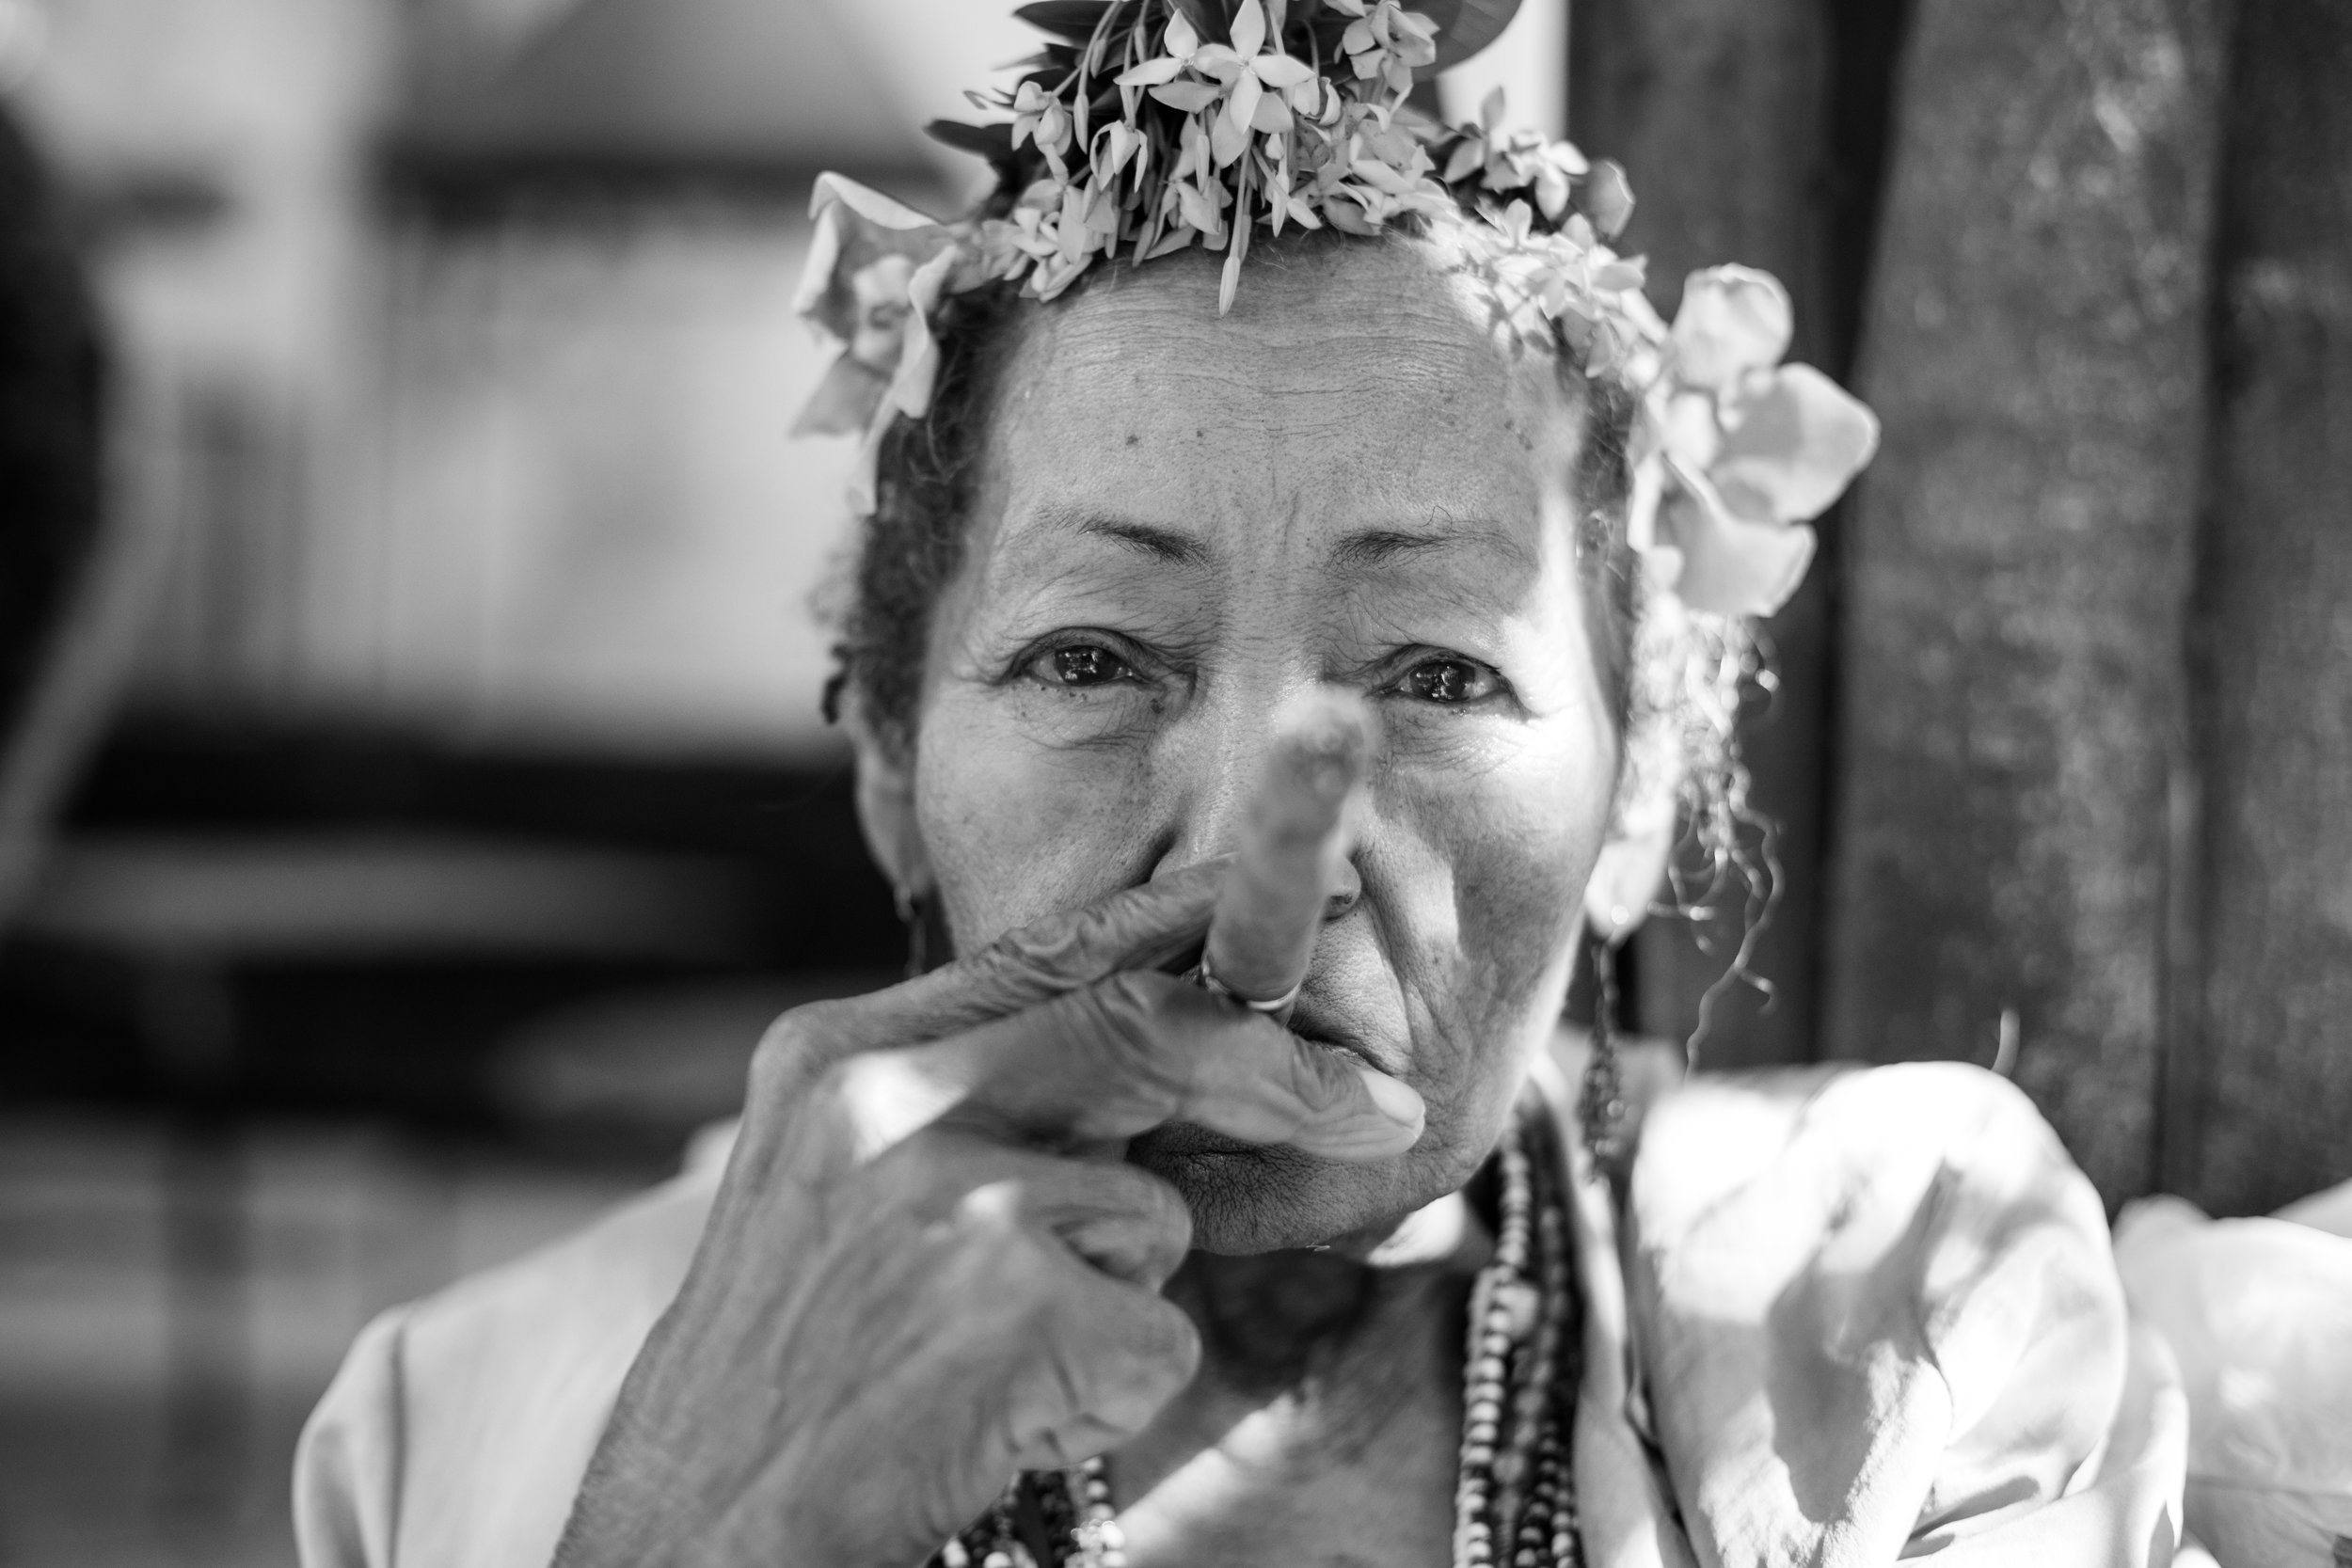 A black and white portrait of an elderly cuban lady with flowers in her hair and a large cuban cigar.